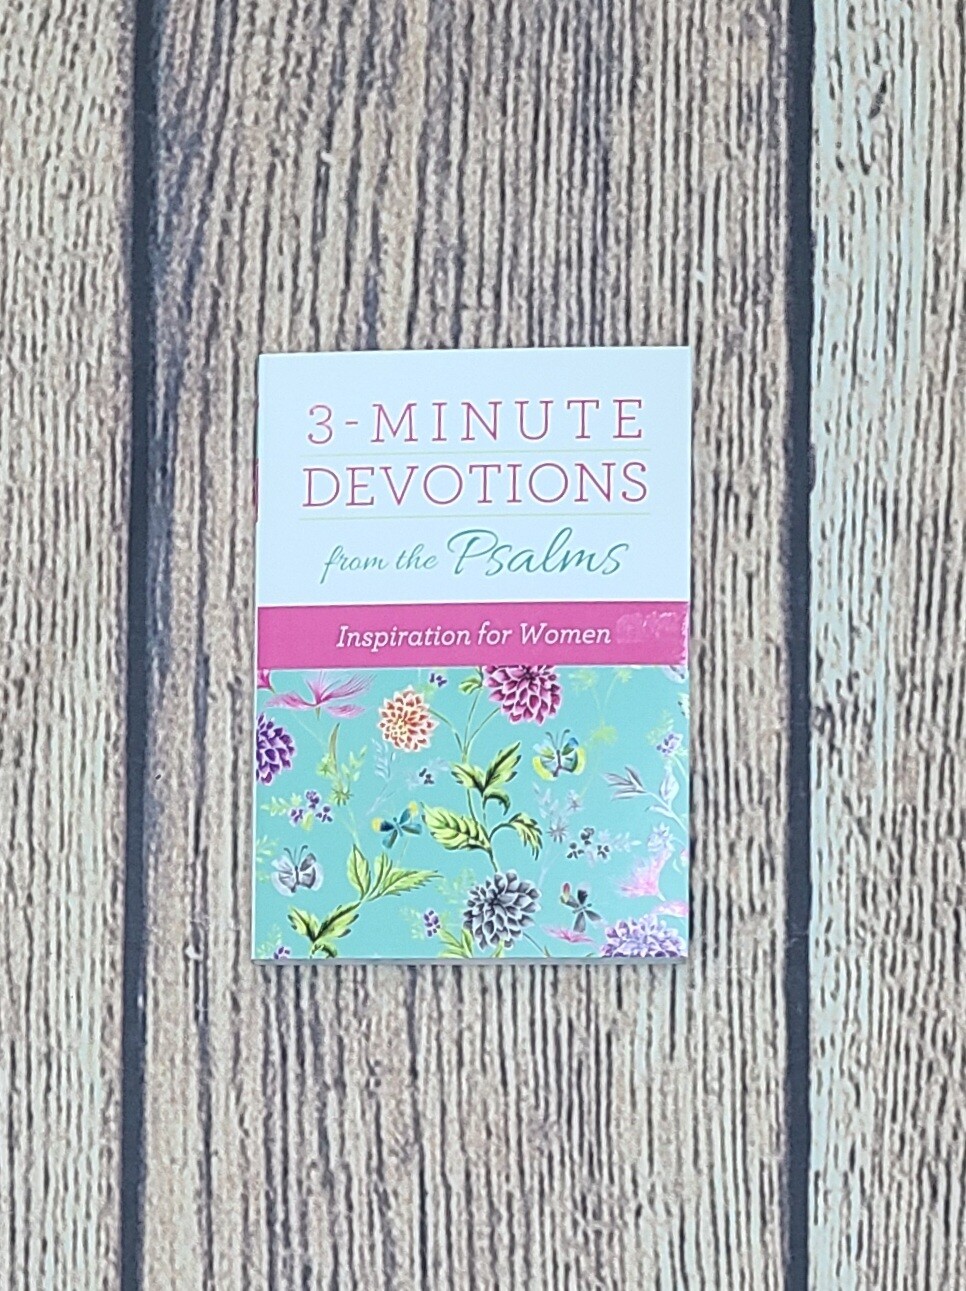 3-Minute Devotions from the Psalms: Inspiration for Women by Vicki J. Kuyper and MariLee Parrish